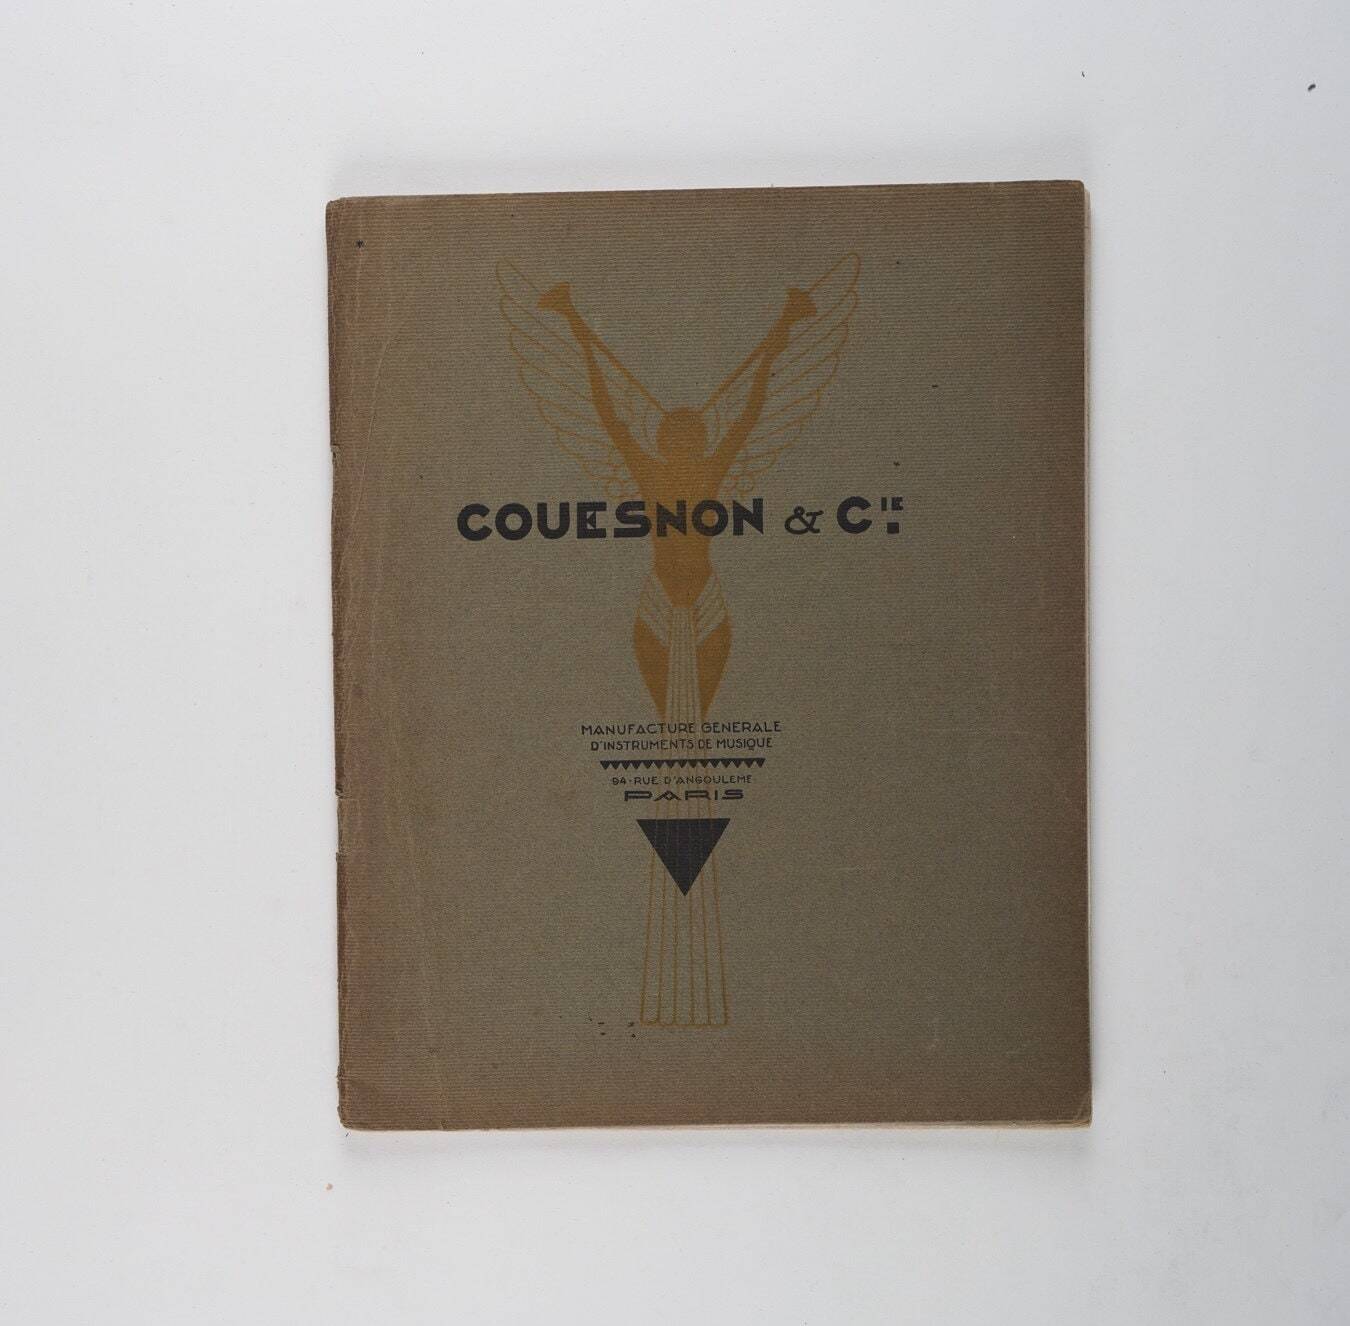 1930s Catalog of Musical Instruments by Couesnon & Cie - Manufacture Generale d